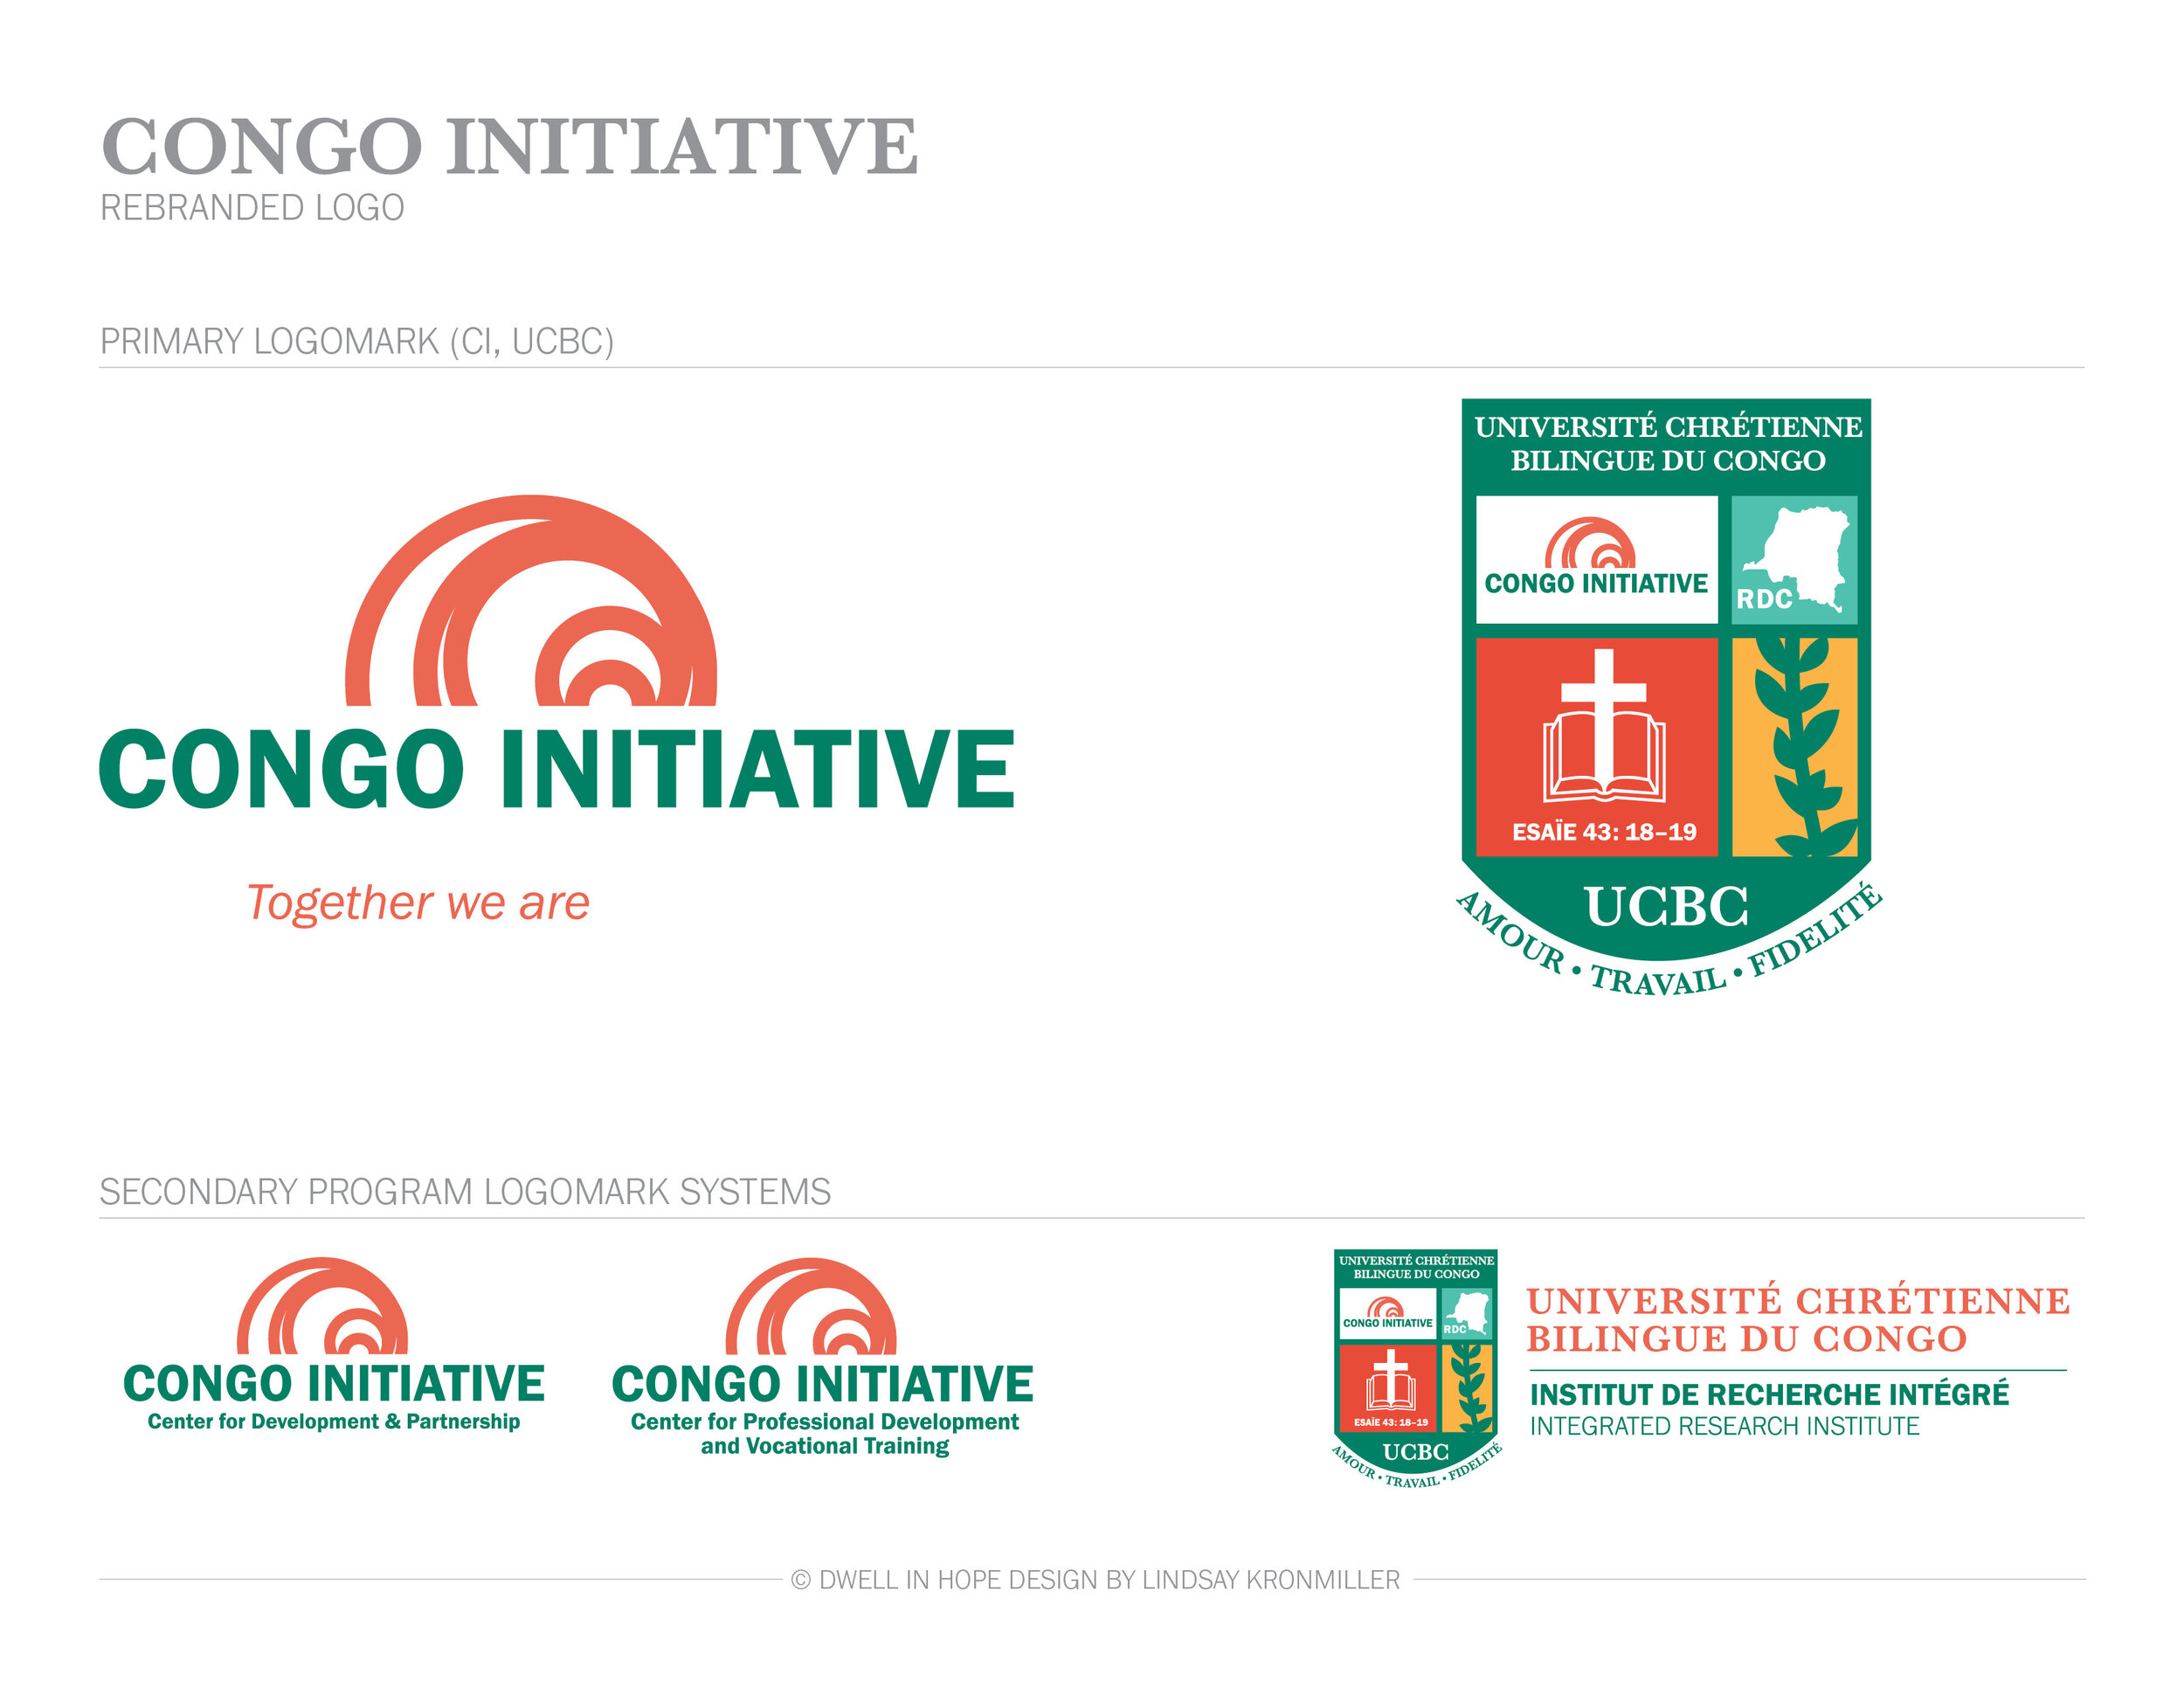  Redesigned logo for Congo Initiative and UCBC. 